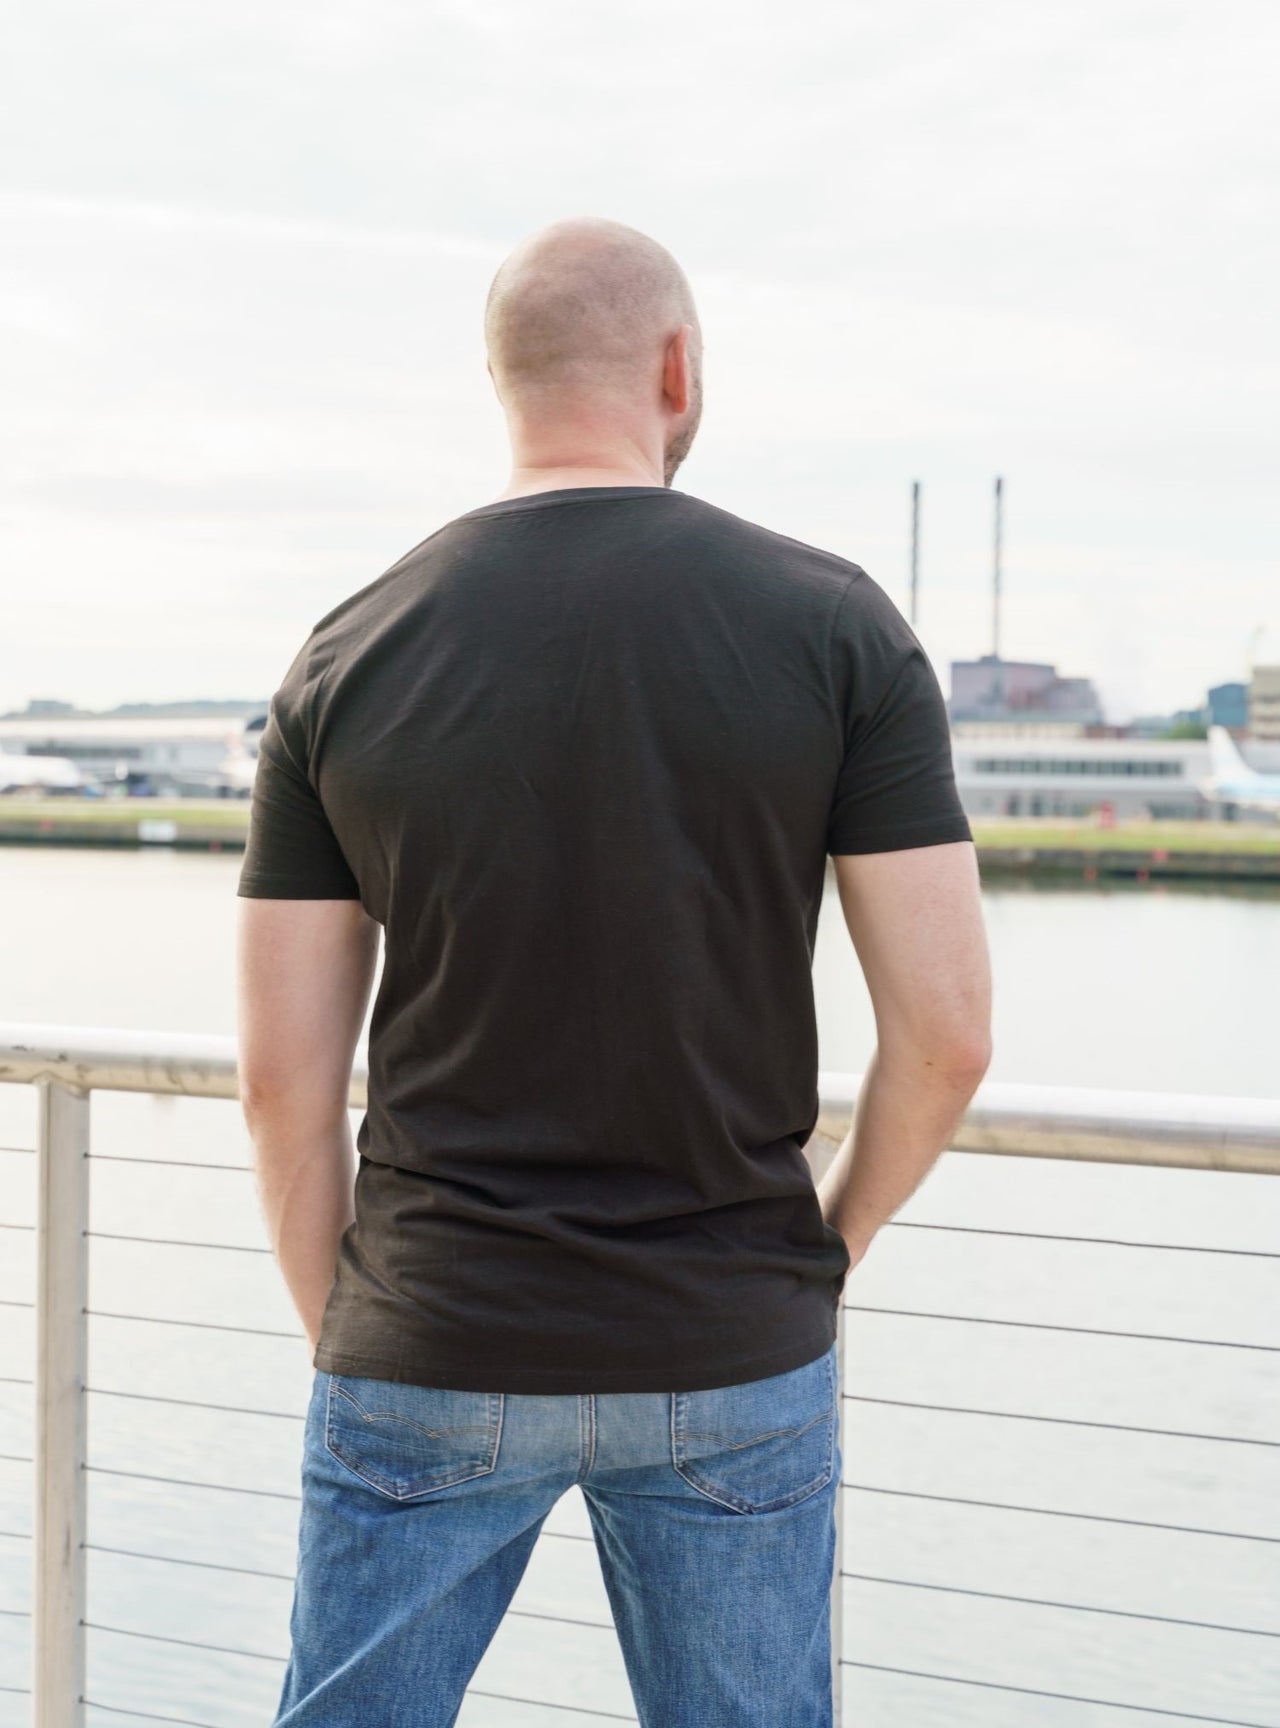 A shot from behind of a tall skinny guy wearing a tall black t-shirt